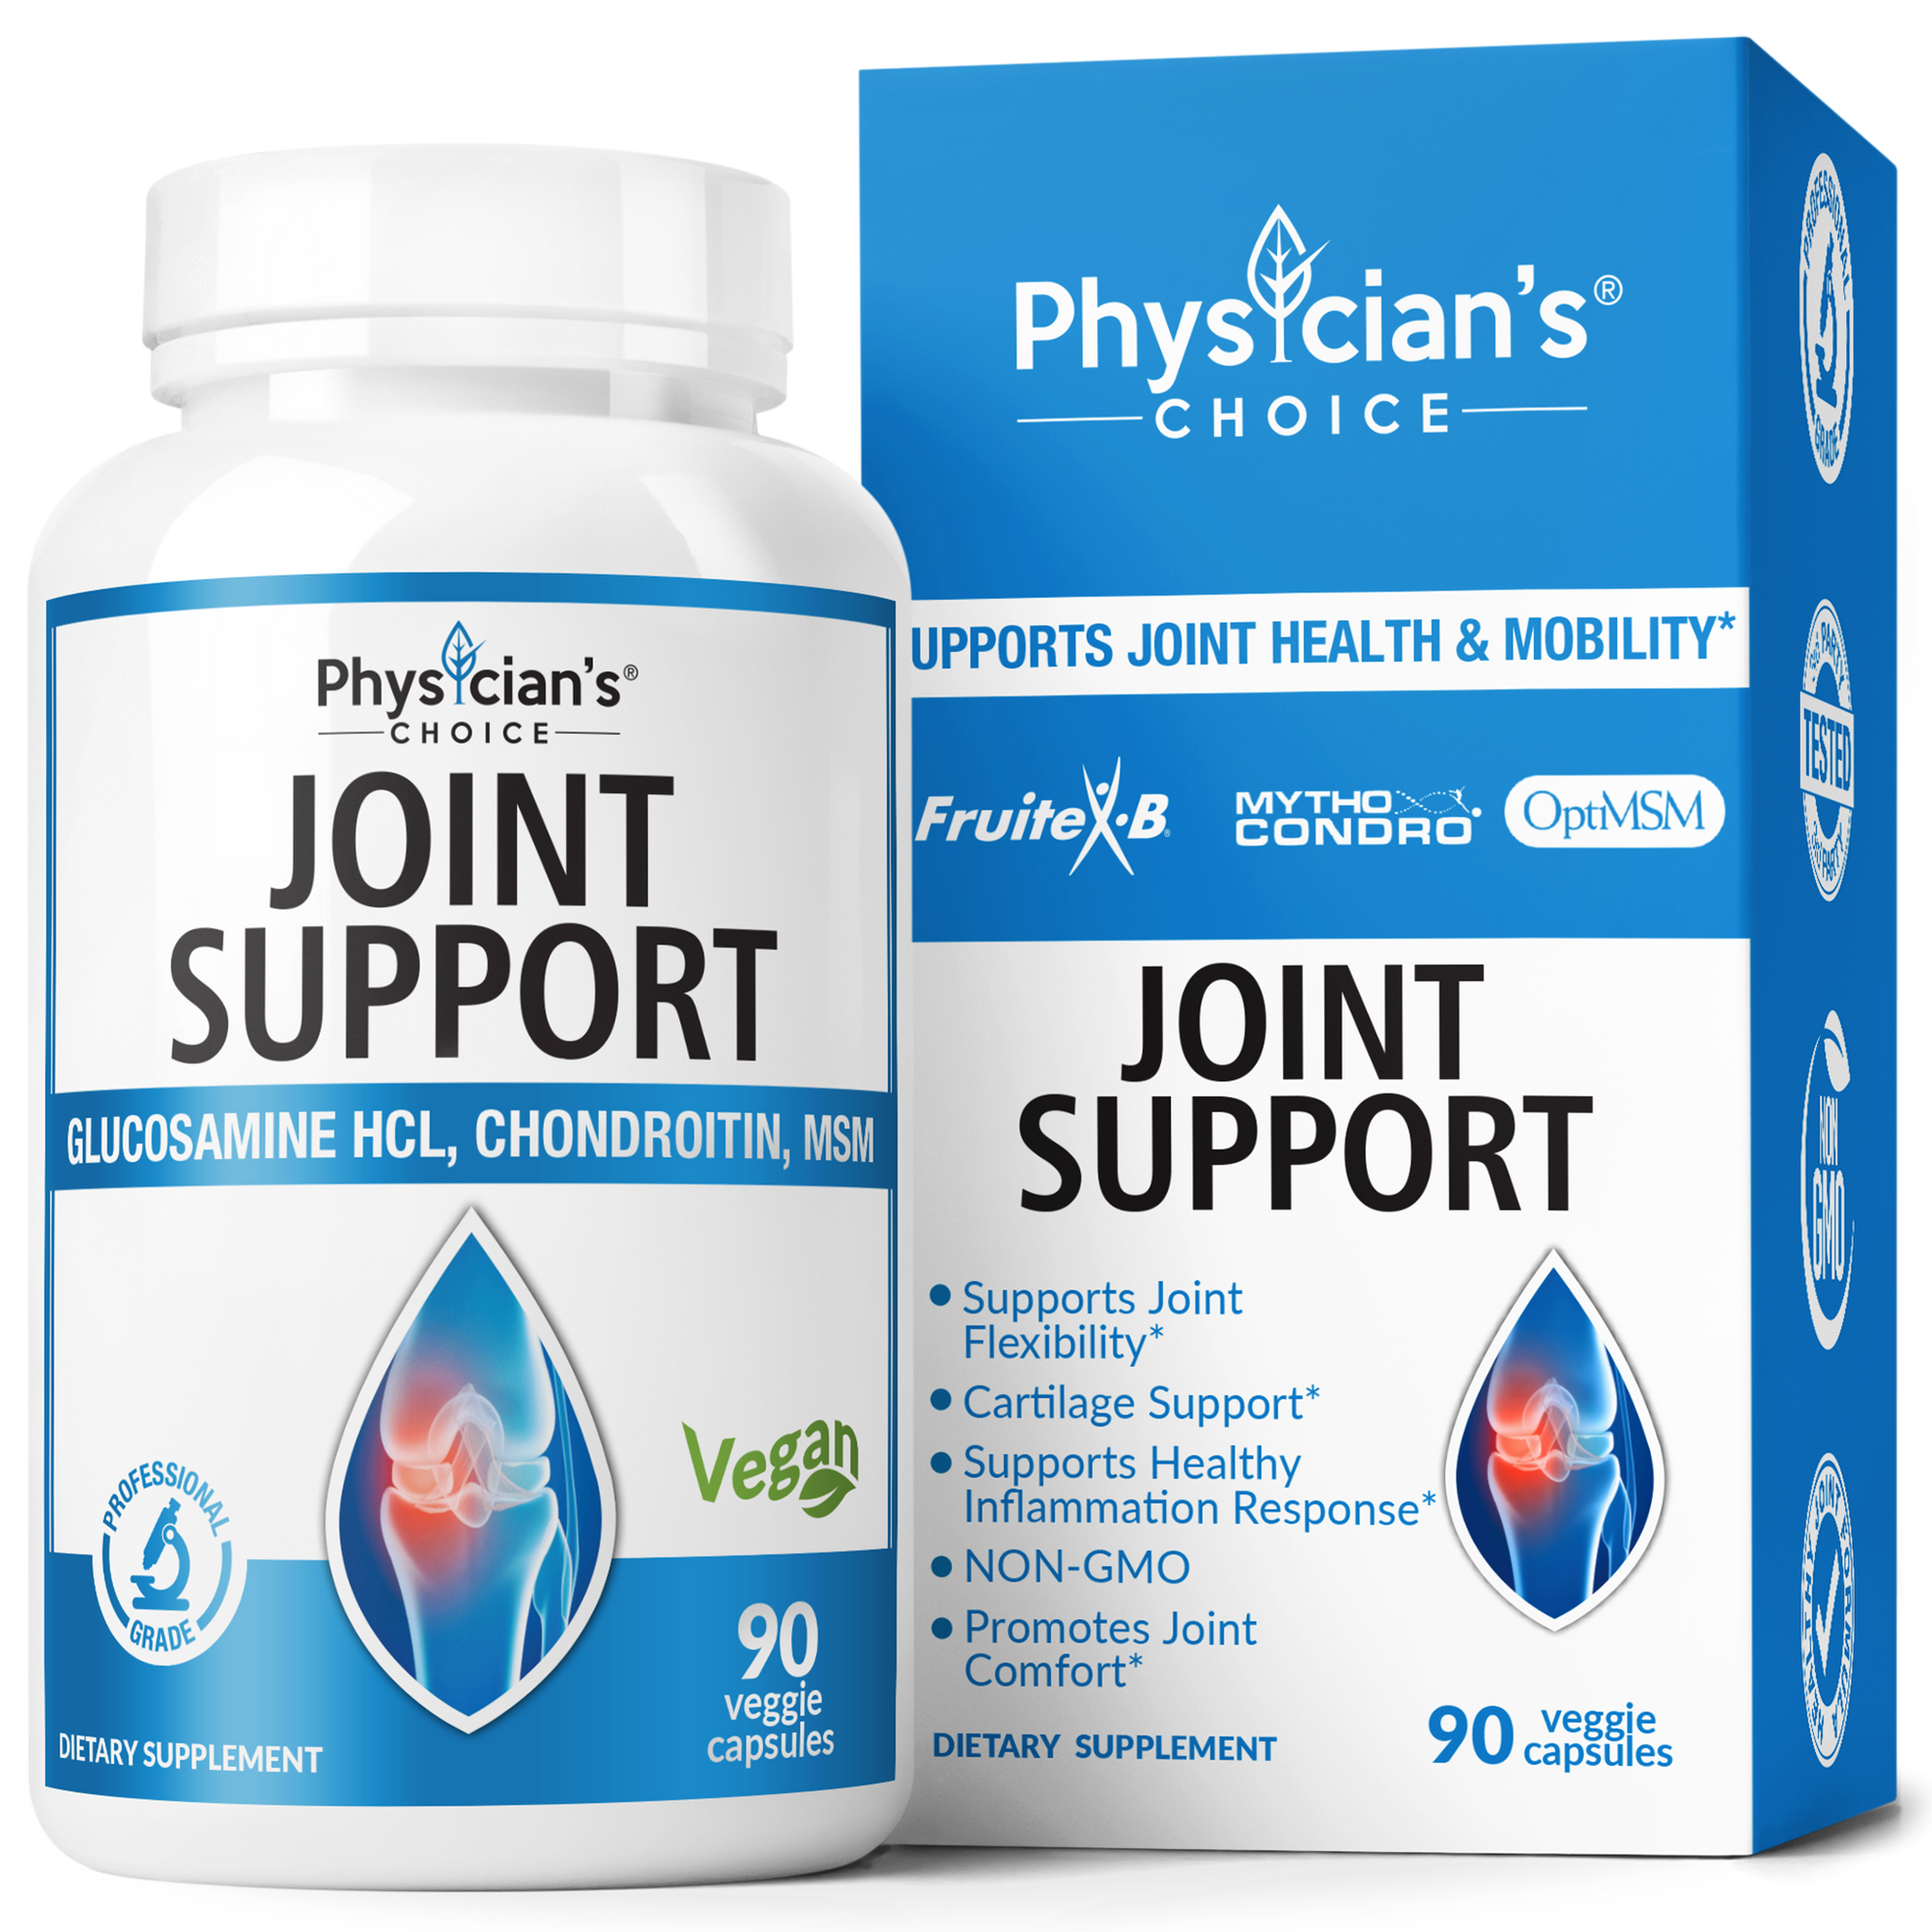 Physician's Choice Joint Support 90-count bottle